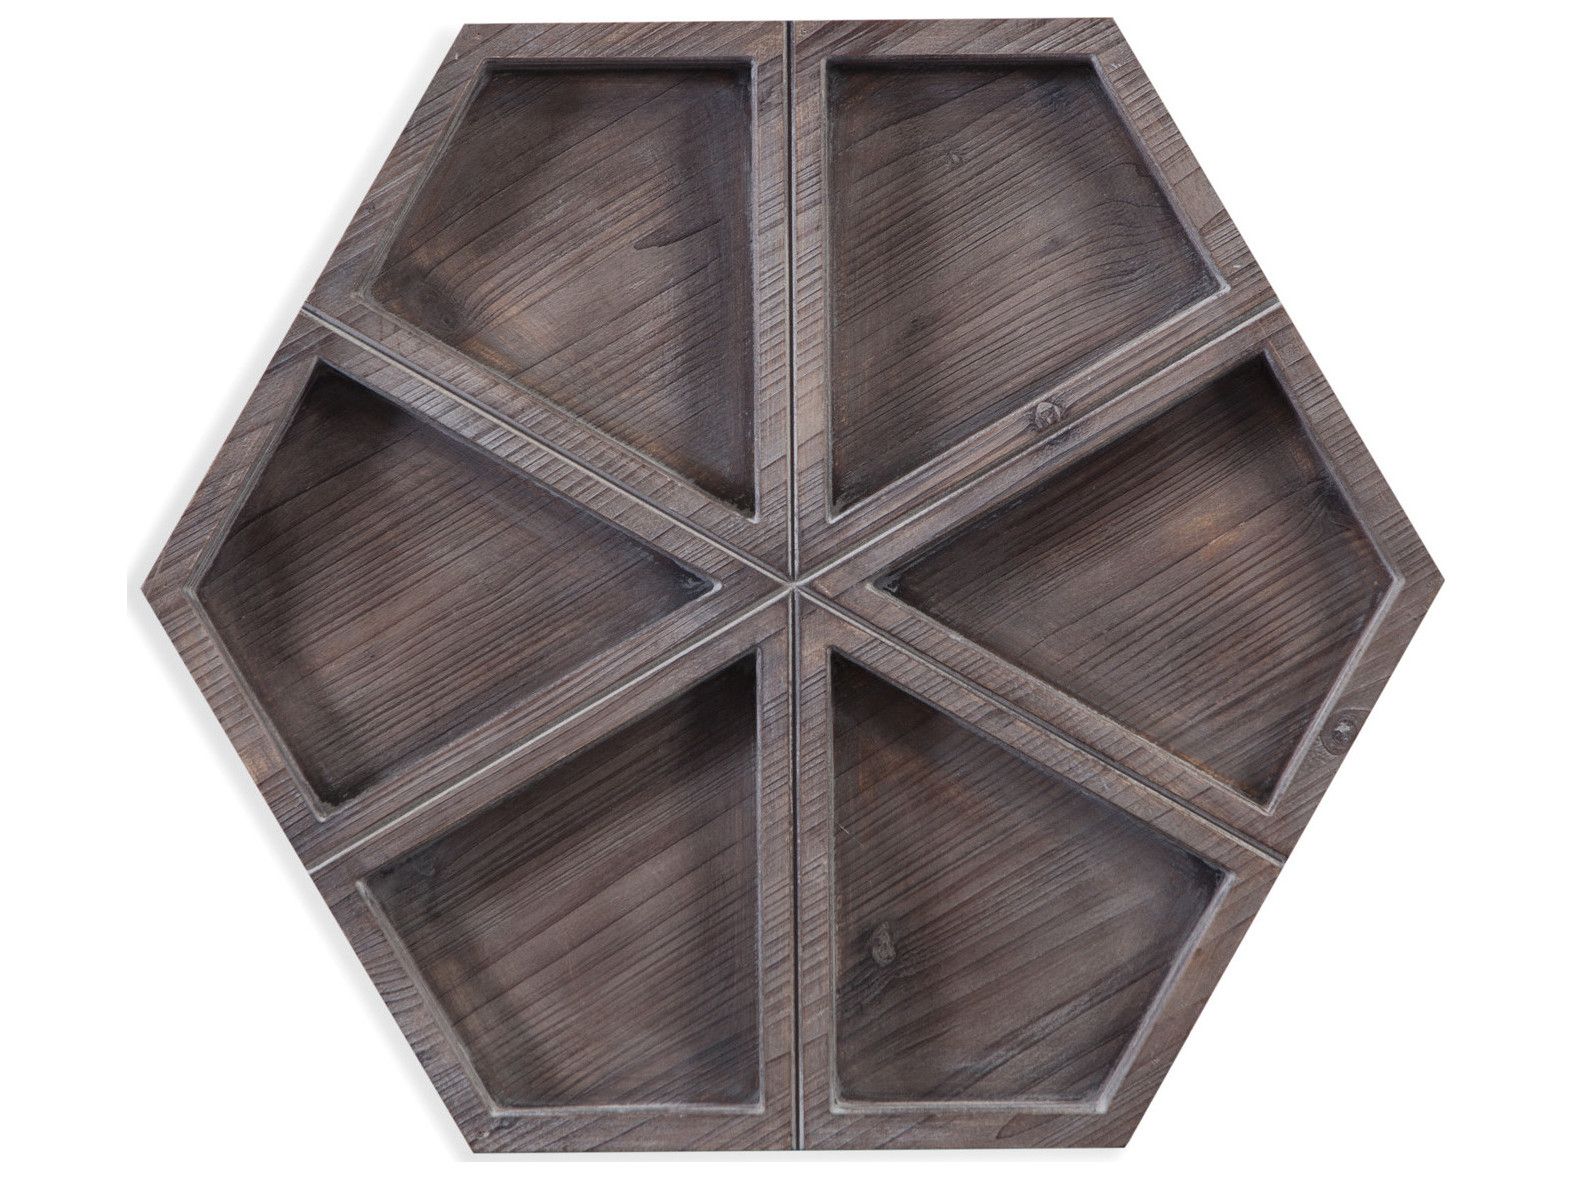 Bassett Mirror 3 Dimensional Wood Wall Art | Ba7500686 Pertaining To Current 3 Dimensional Wall Art (View 16 of 20)